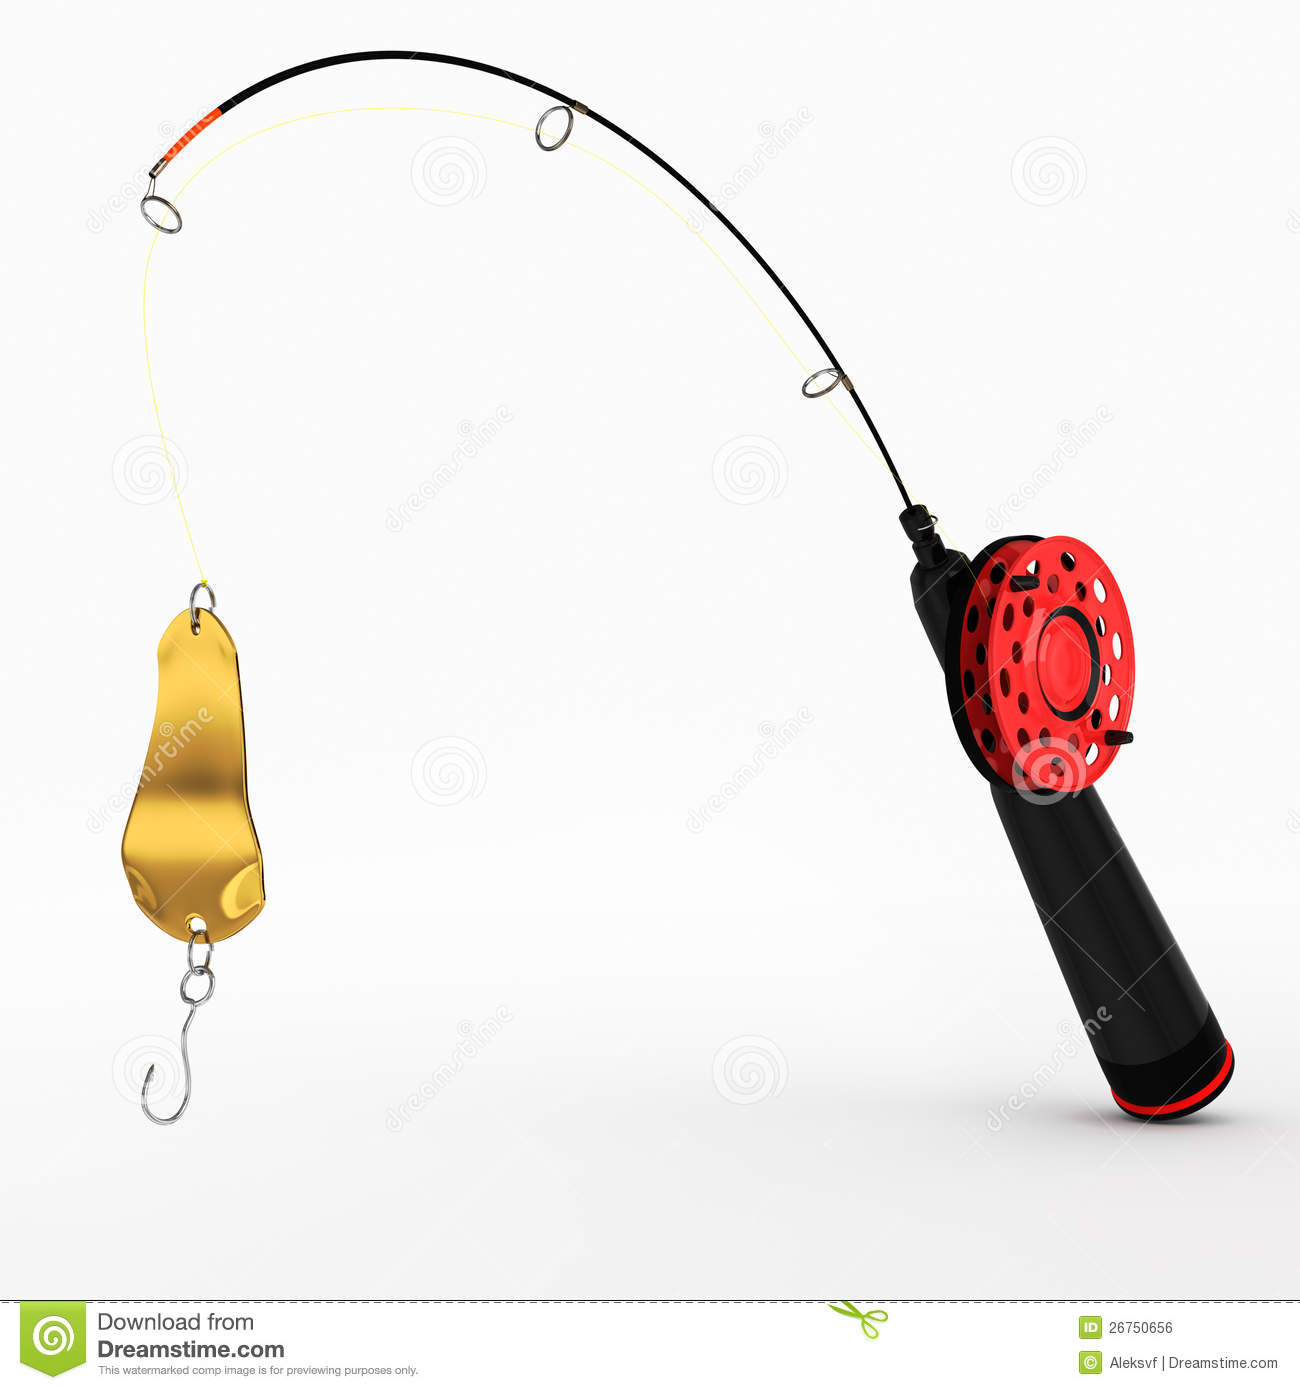 Ice Fishing Rod With Spoon Royalty Free Stock Image   Image  26750656